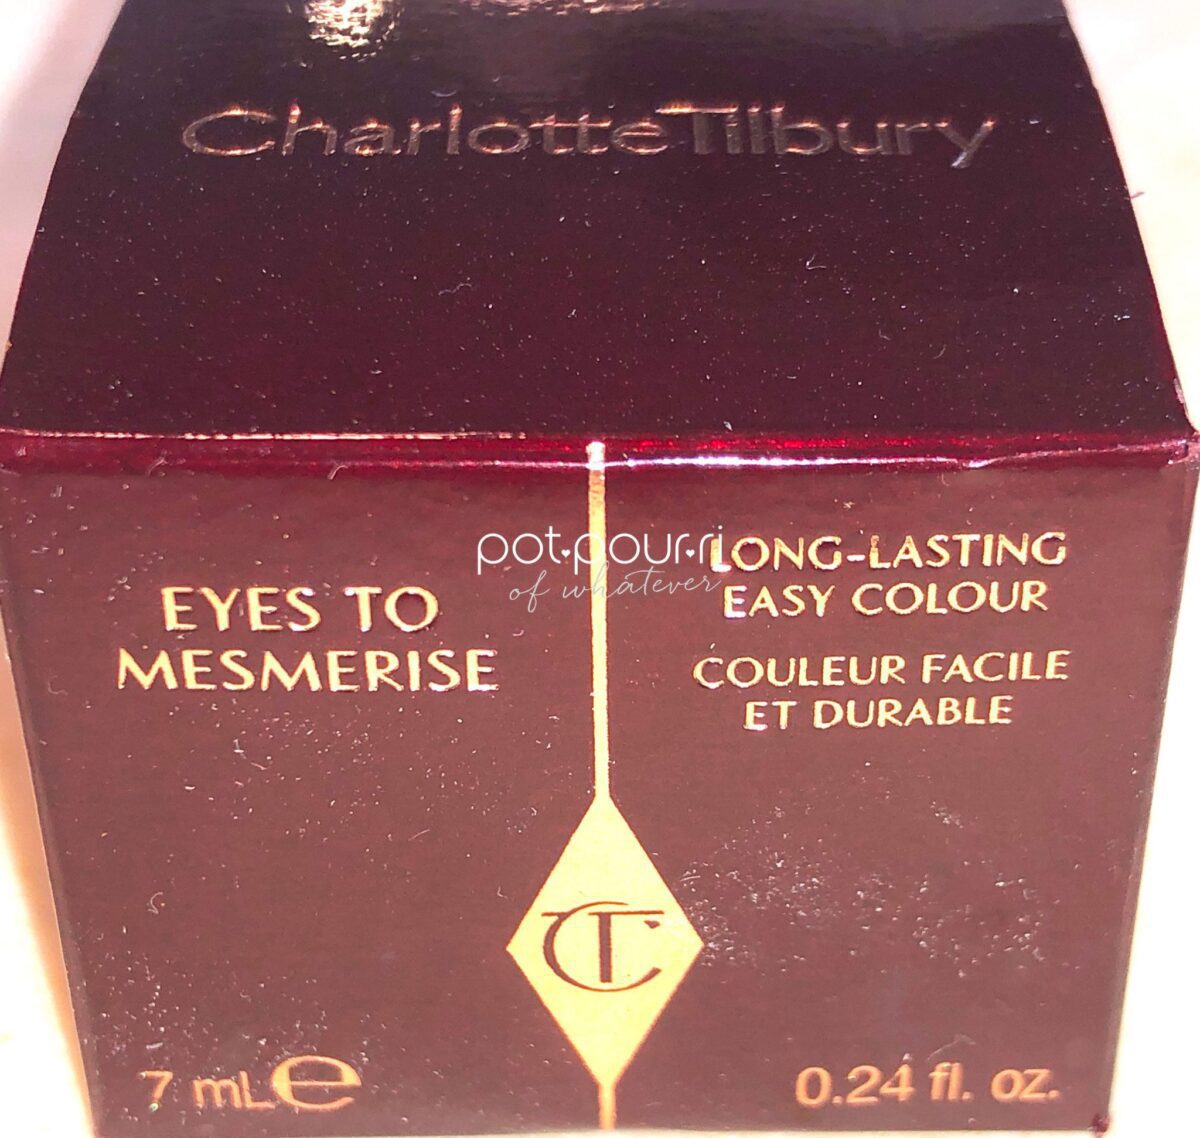 EYES TO MESMERIZE IN ROSE GOLD PACKAGING